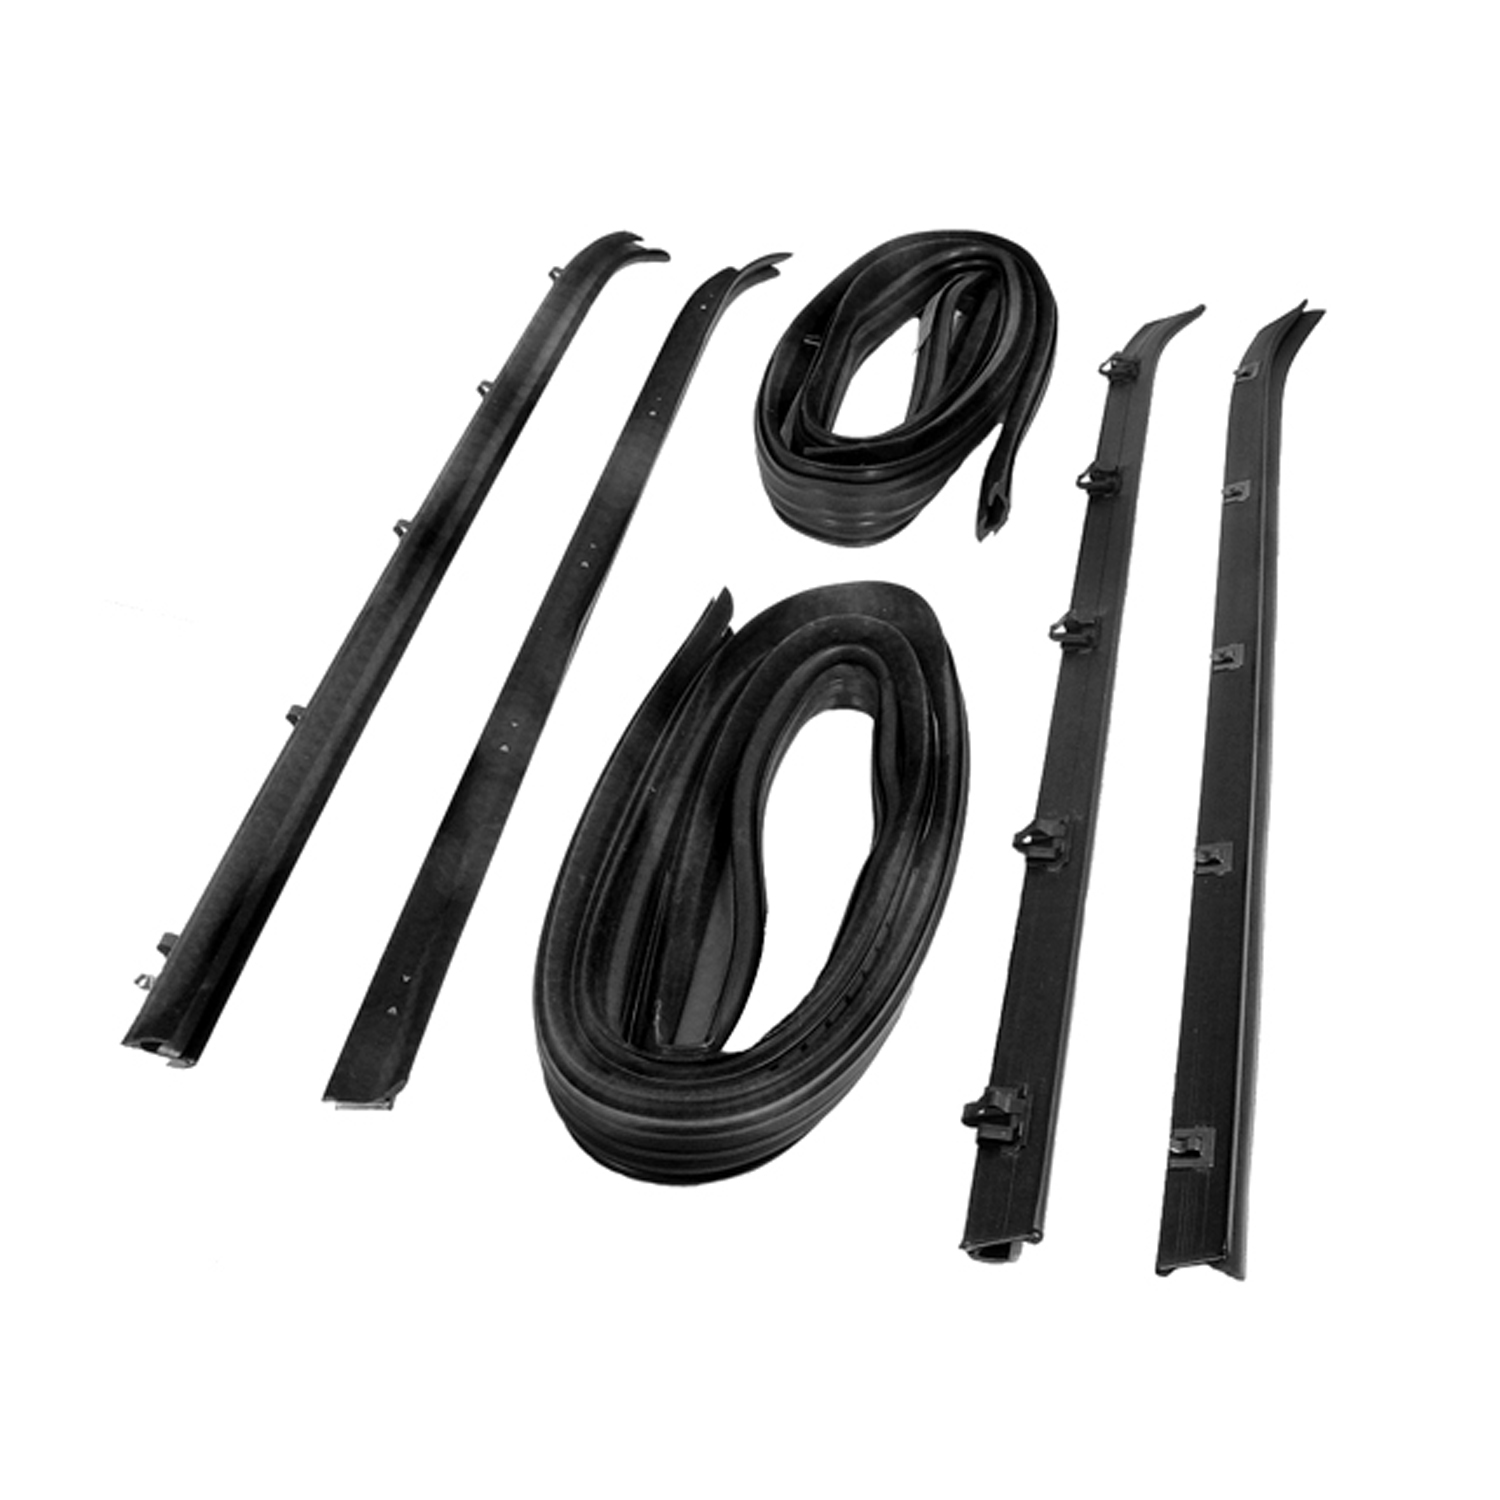 1978 Chevrolet C10 Suburban Window Channel and Sweeper Kit, for Front Doors-WC 5900-15